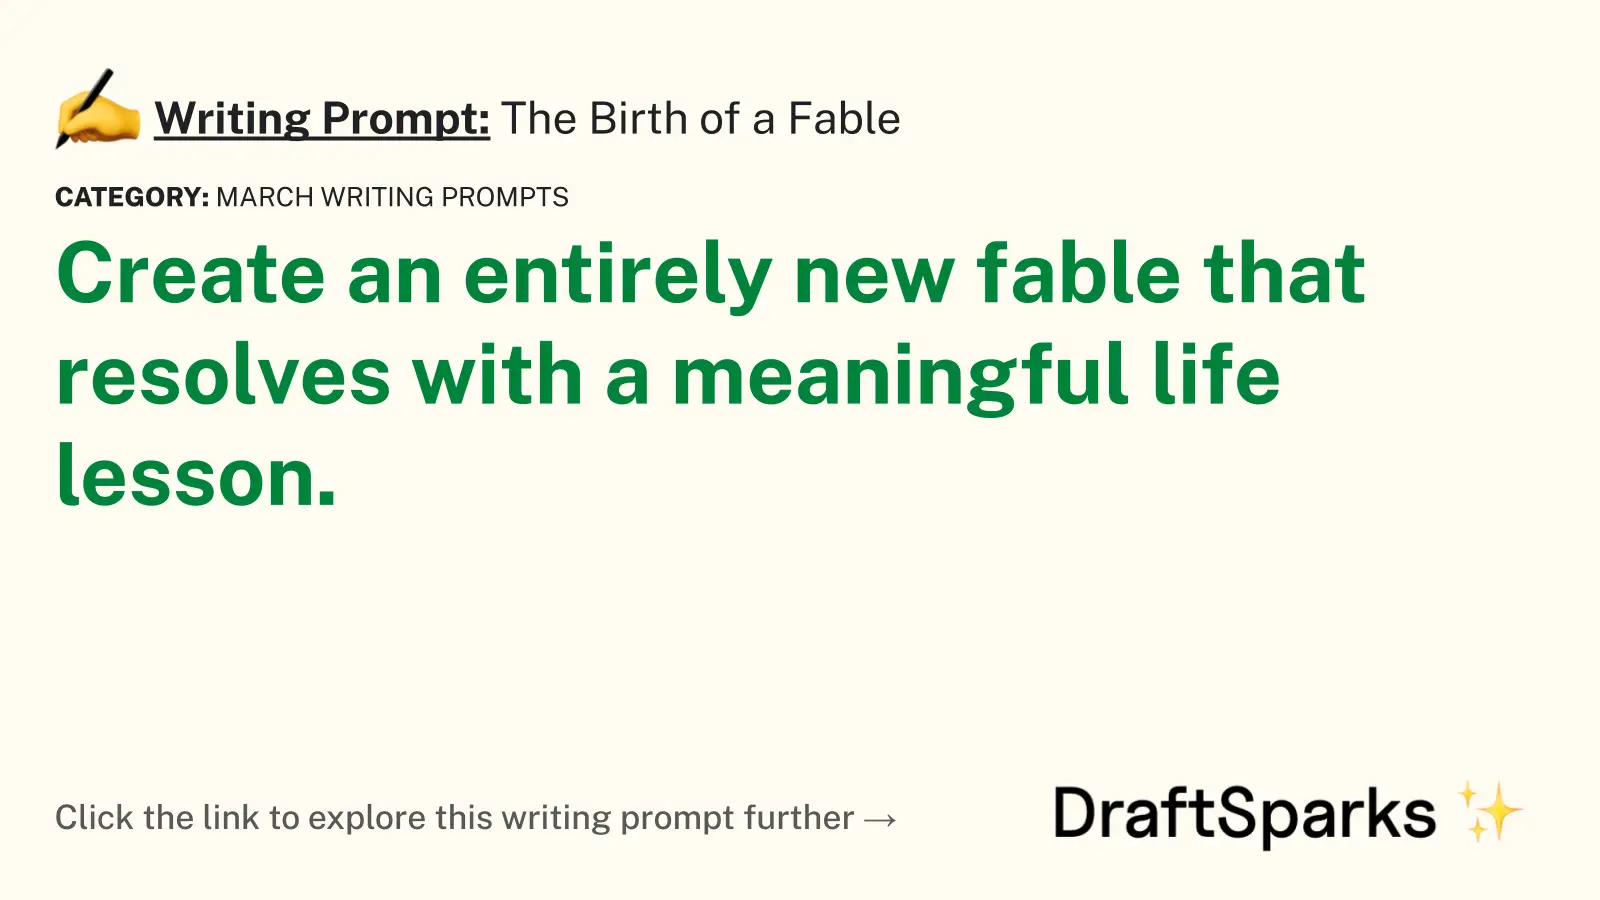 The Birth of a Fable